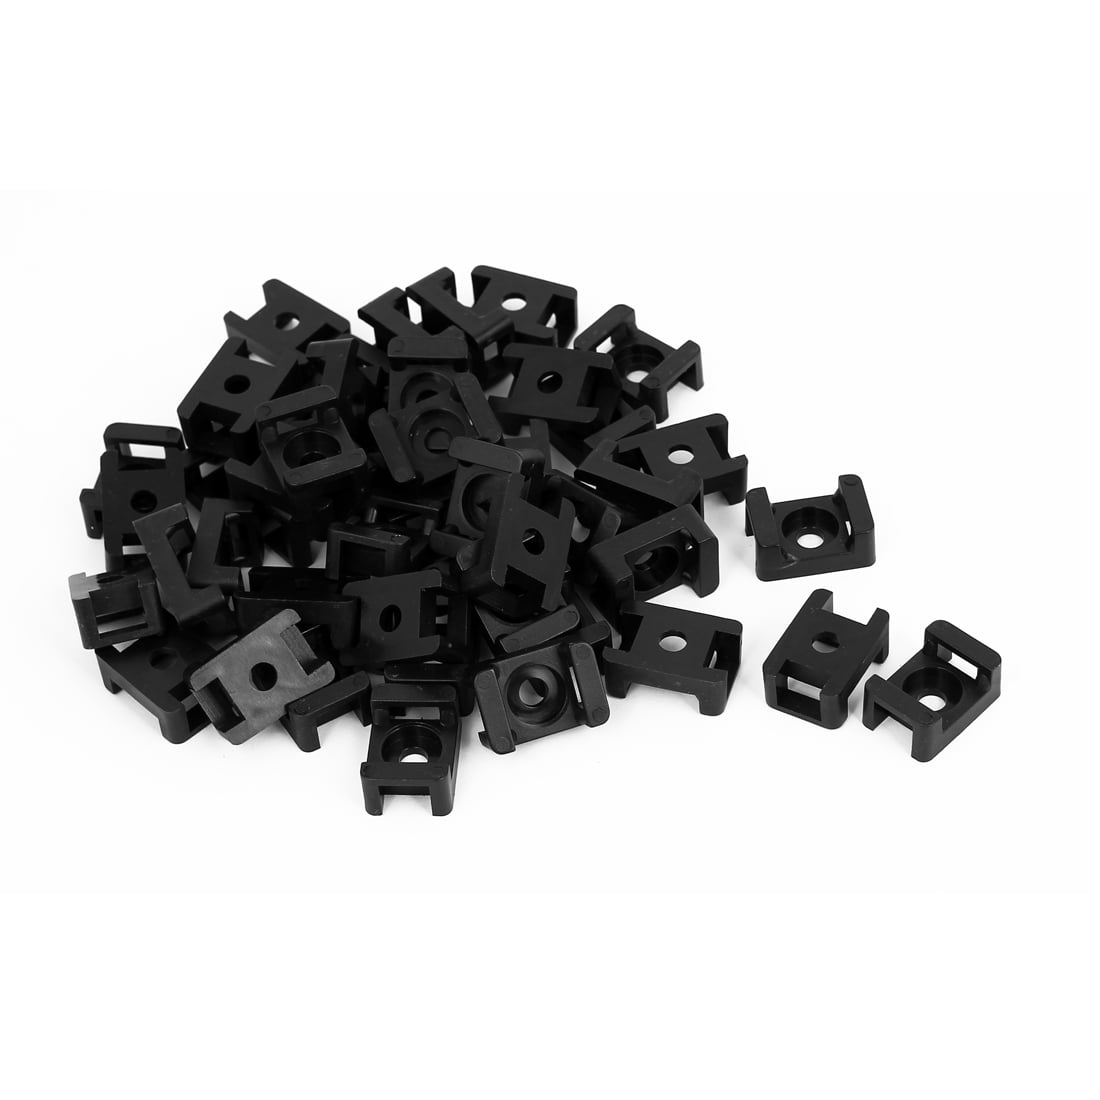 Cable Tie Base Saddle Plastic For Mount Wire Holder Black 4.5mm 100 Pieces New 